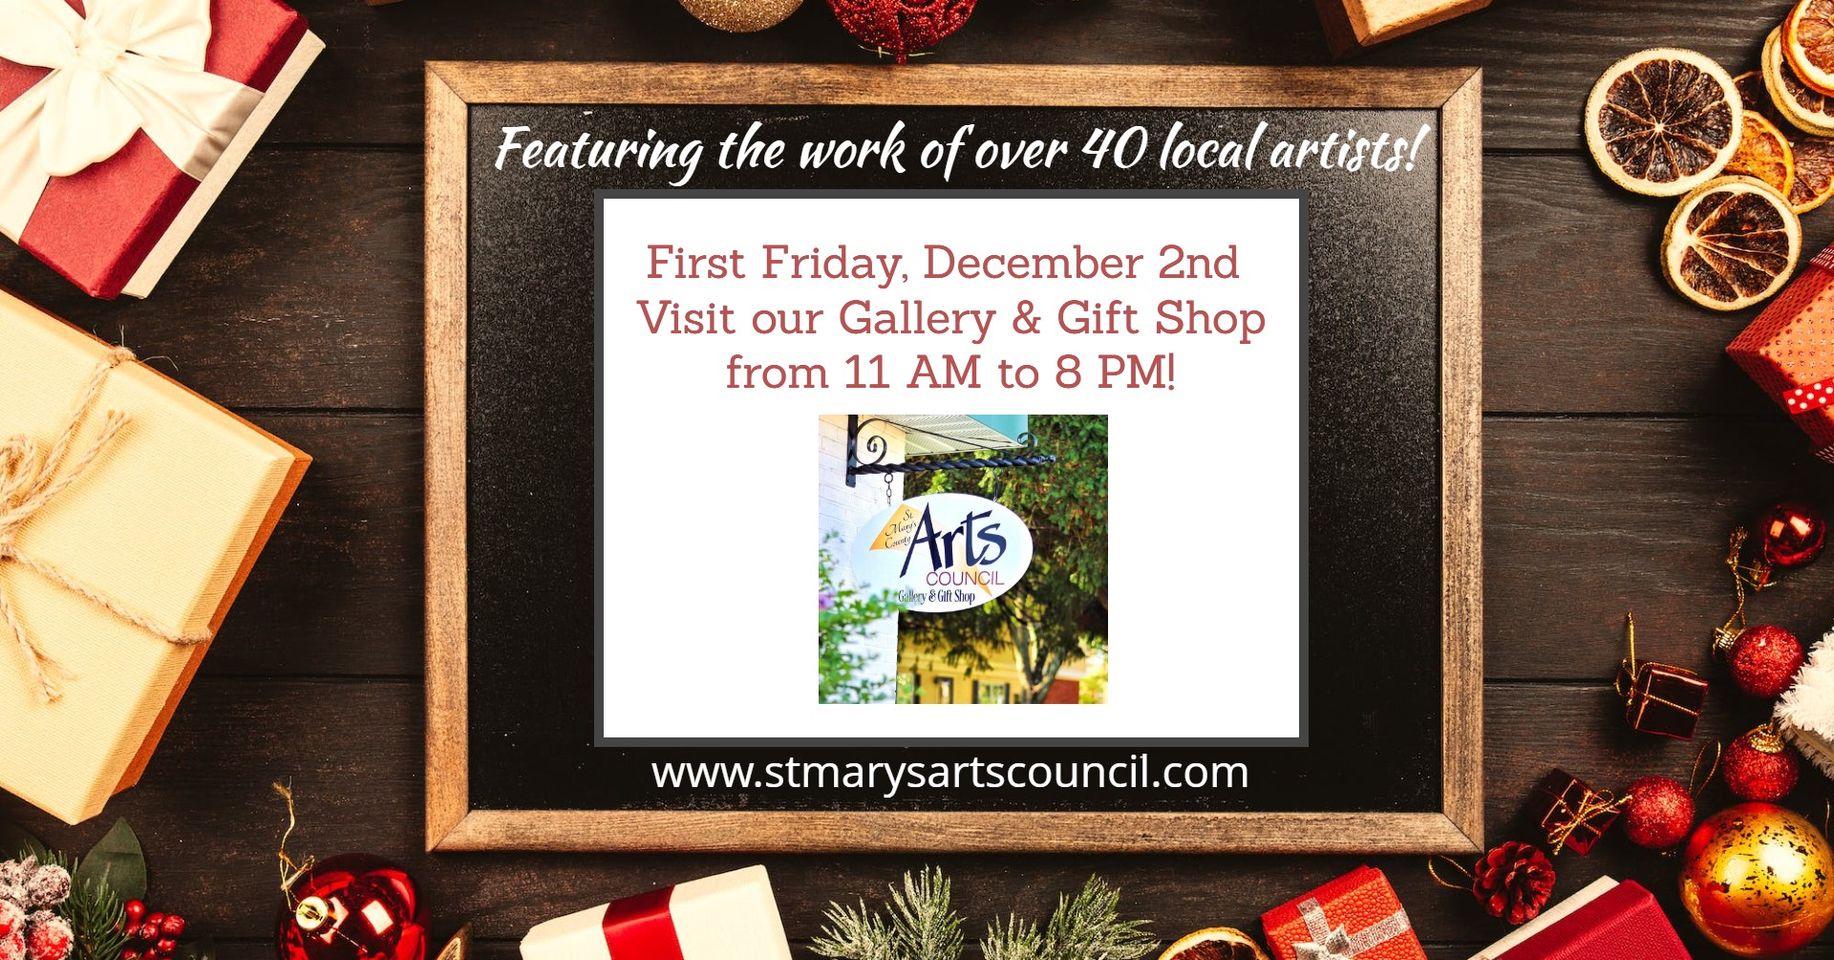 First Friday at St. Mary's County Arts Council (Leonardtown, MD)